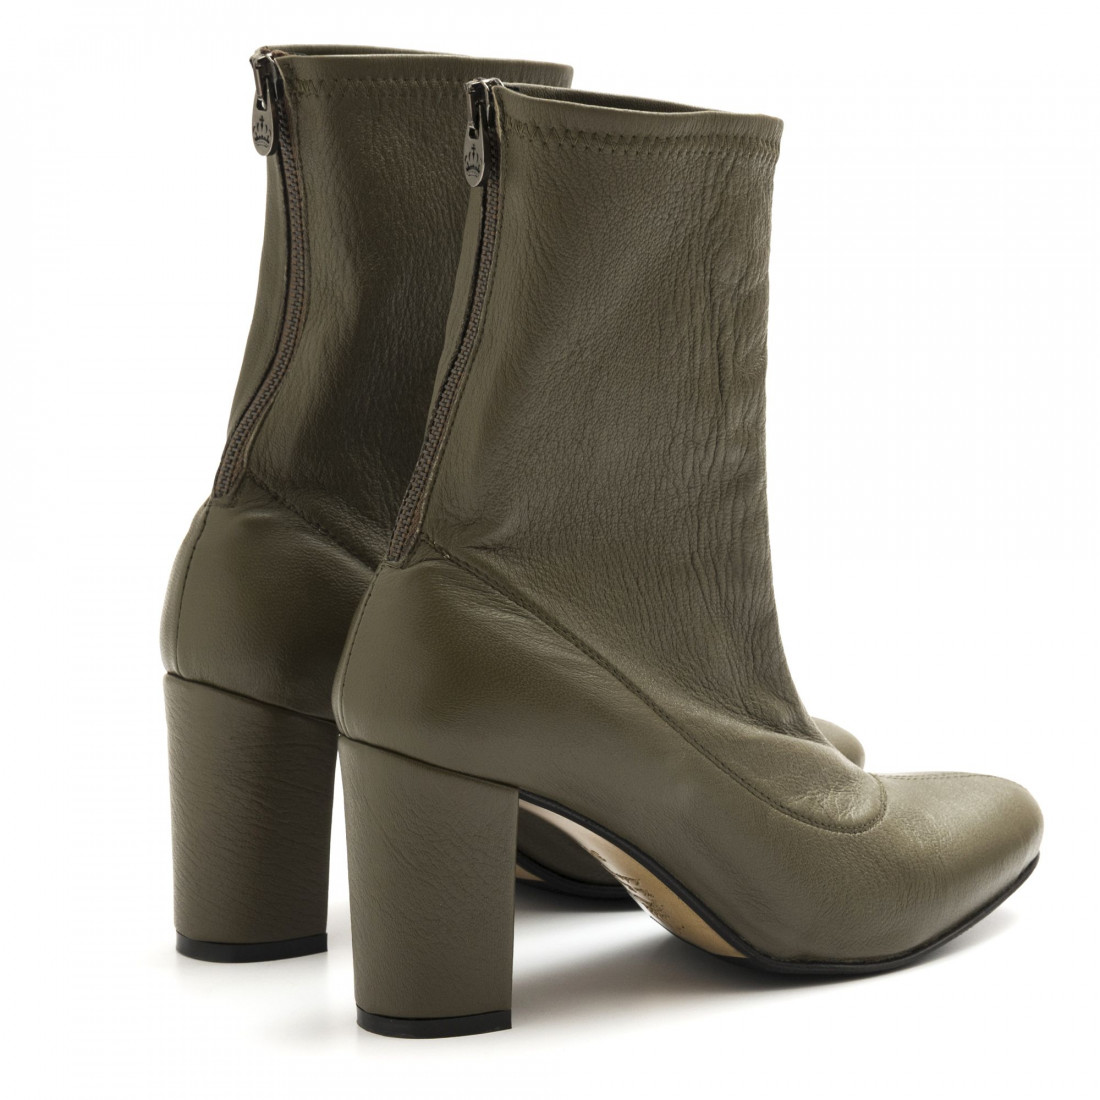 Olive green L'Arianna stretch leather booties